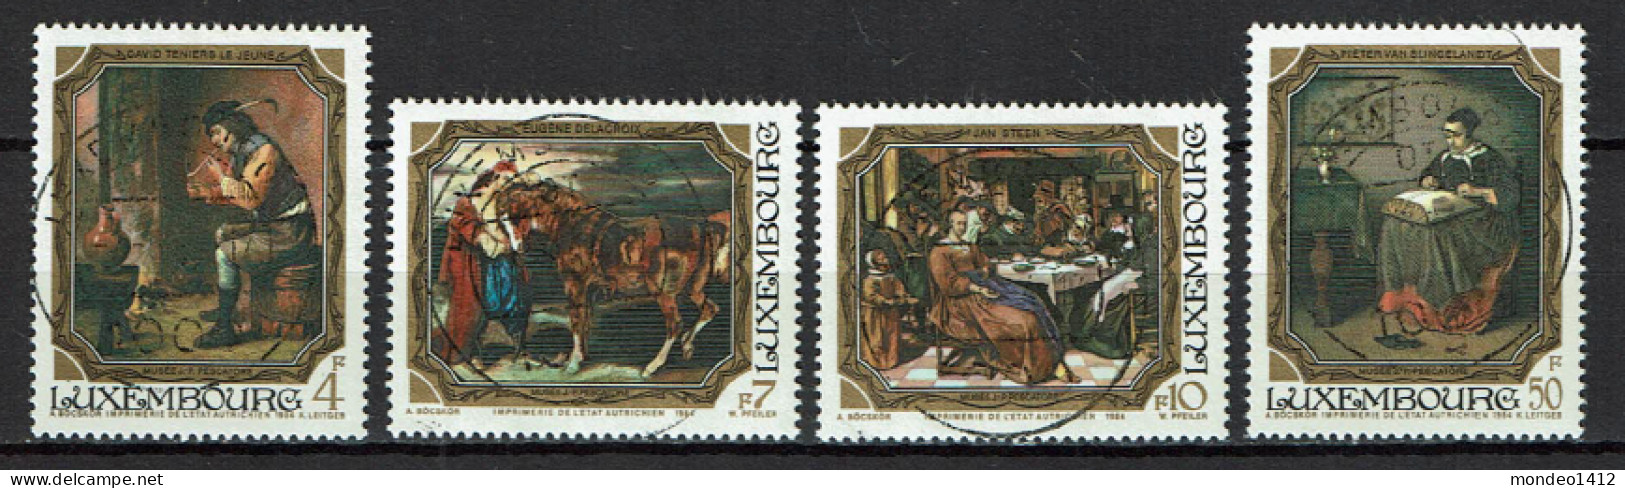 Luxembourg 1984 - YT 1050/1063 - Paintings From Pescatore Museum, Peinture, Tableaux - Usati